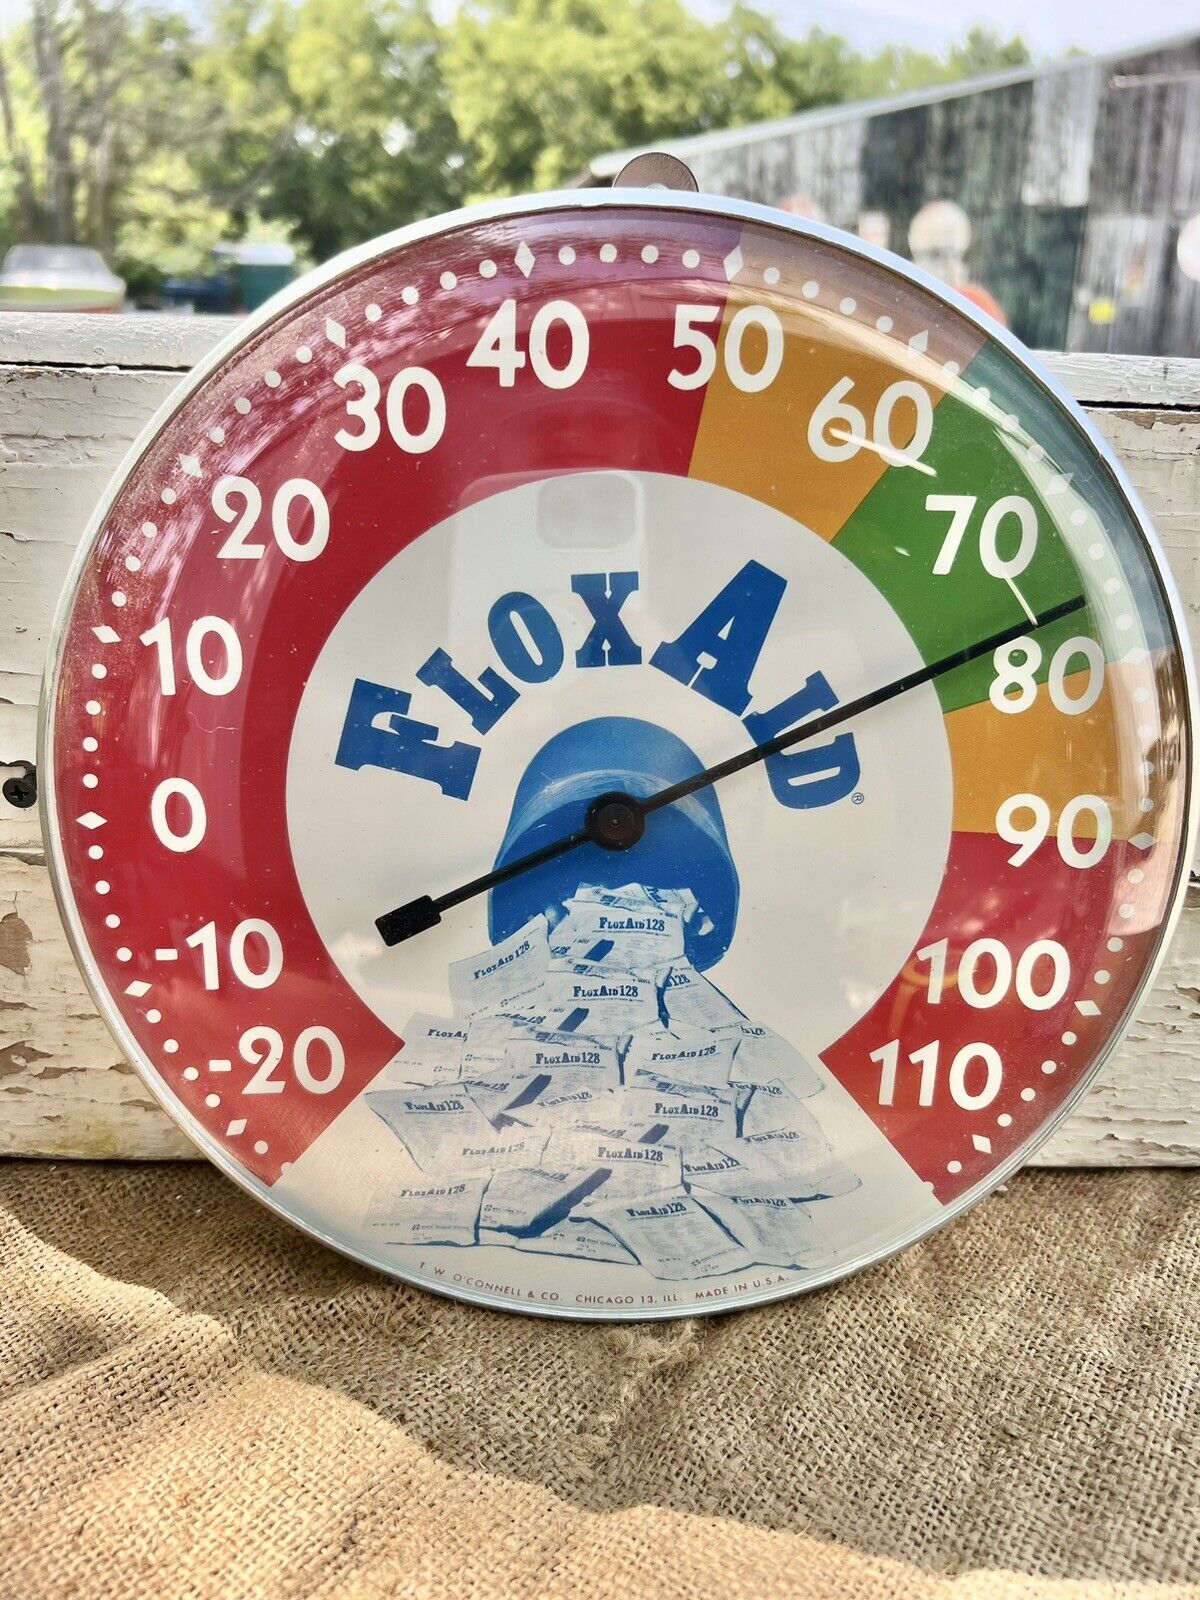 NICE MINT Vintage Flox Aid Poultry Chicken Farm Advertising Thermometer 10\